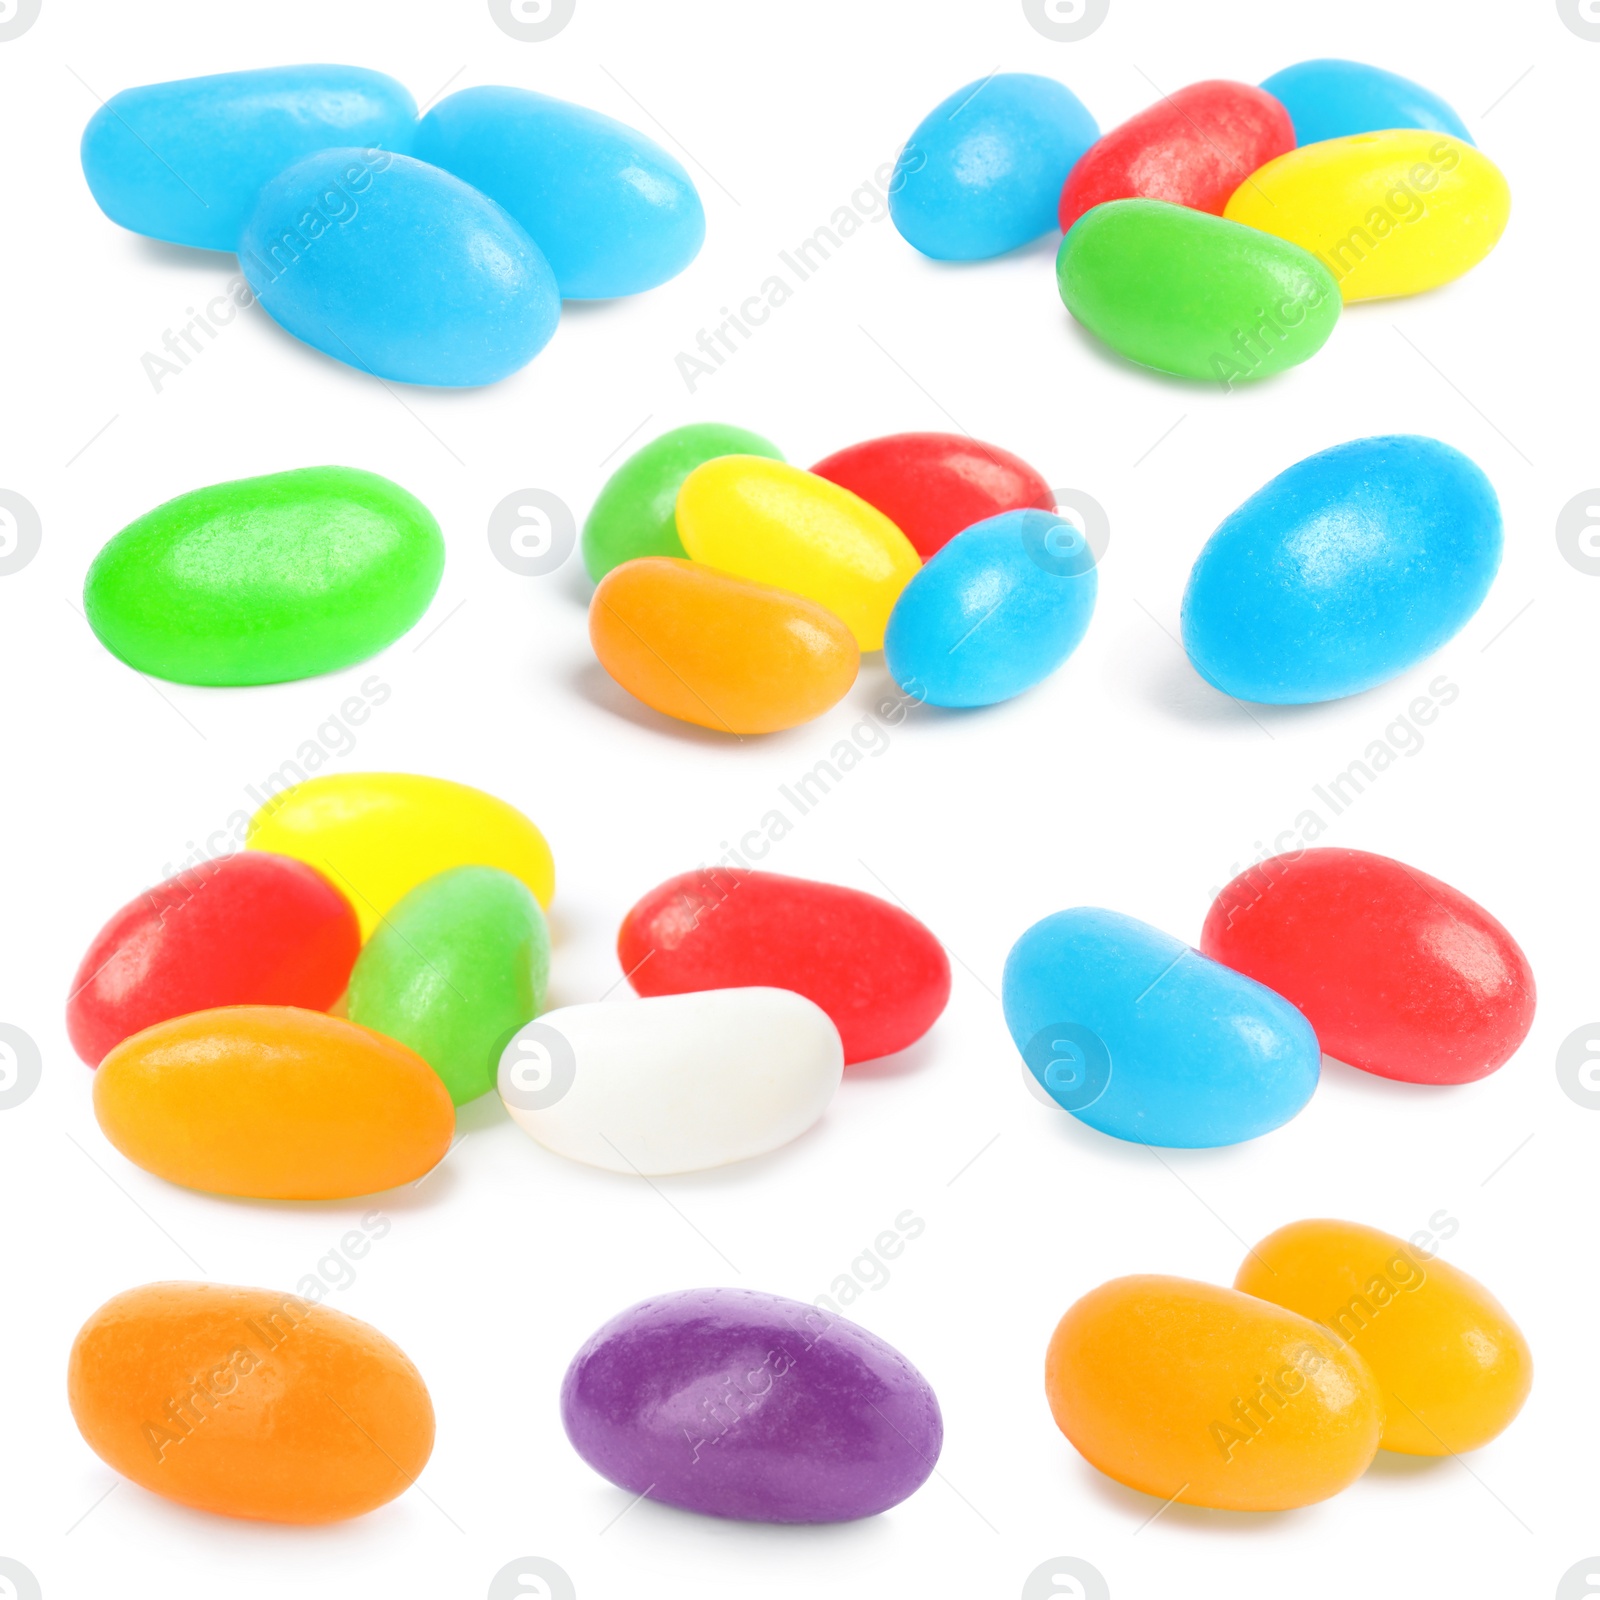 Image of Delicious jelly beans isolated on white, set